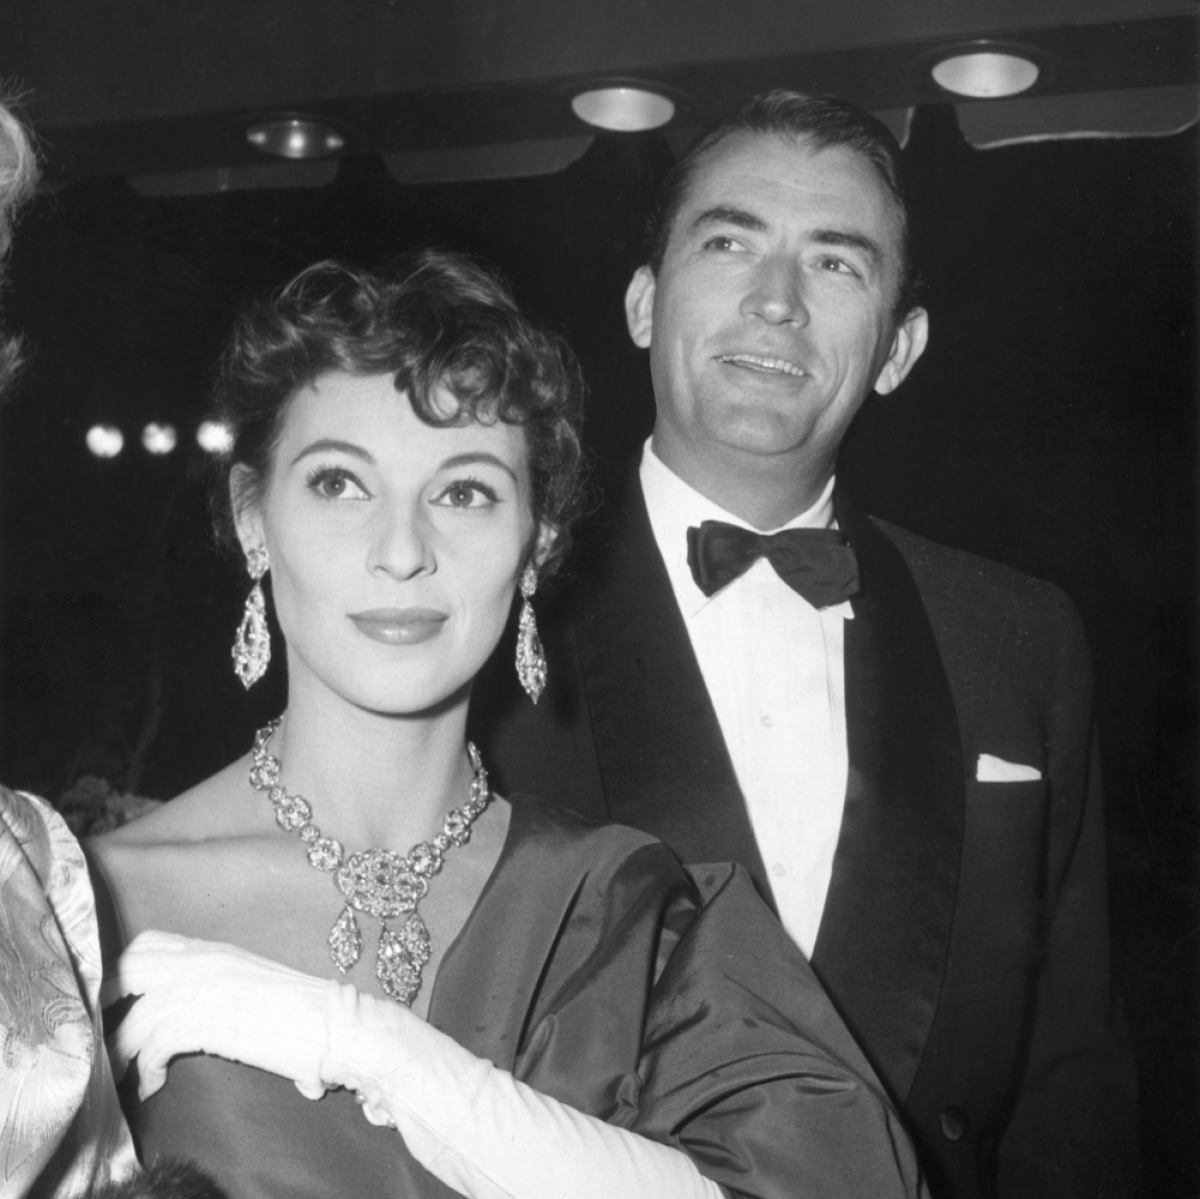 Personal collection of Hollywood legend Gregory Peck and his wife, Veronique, are being auctioned on Feb. 23.